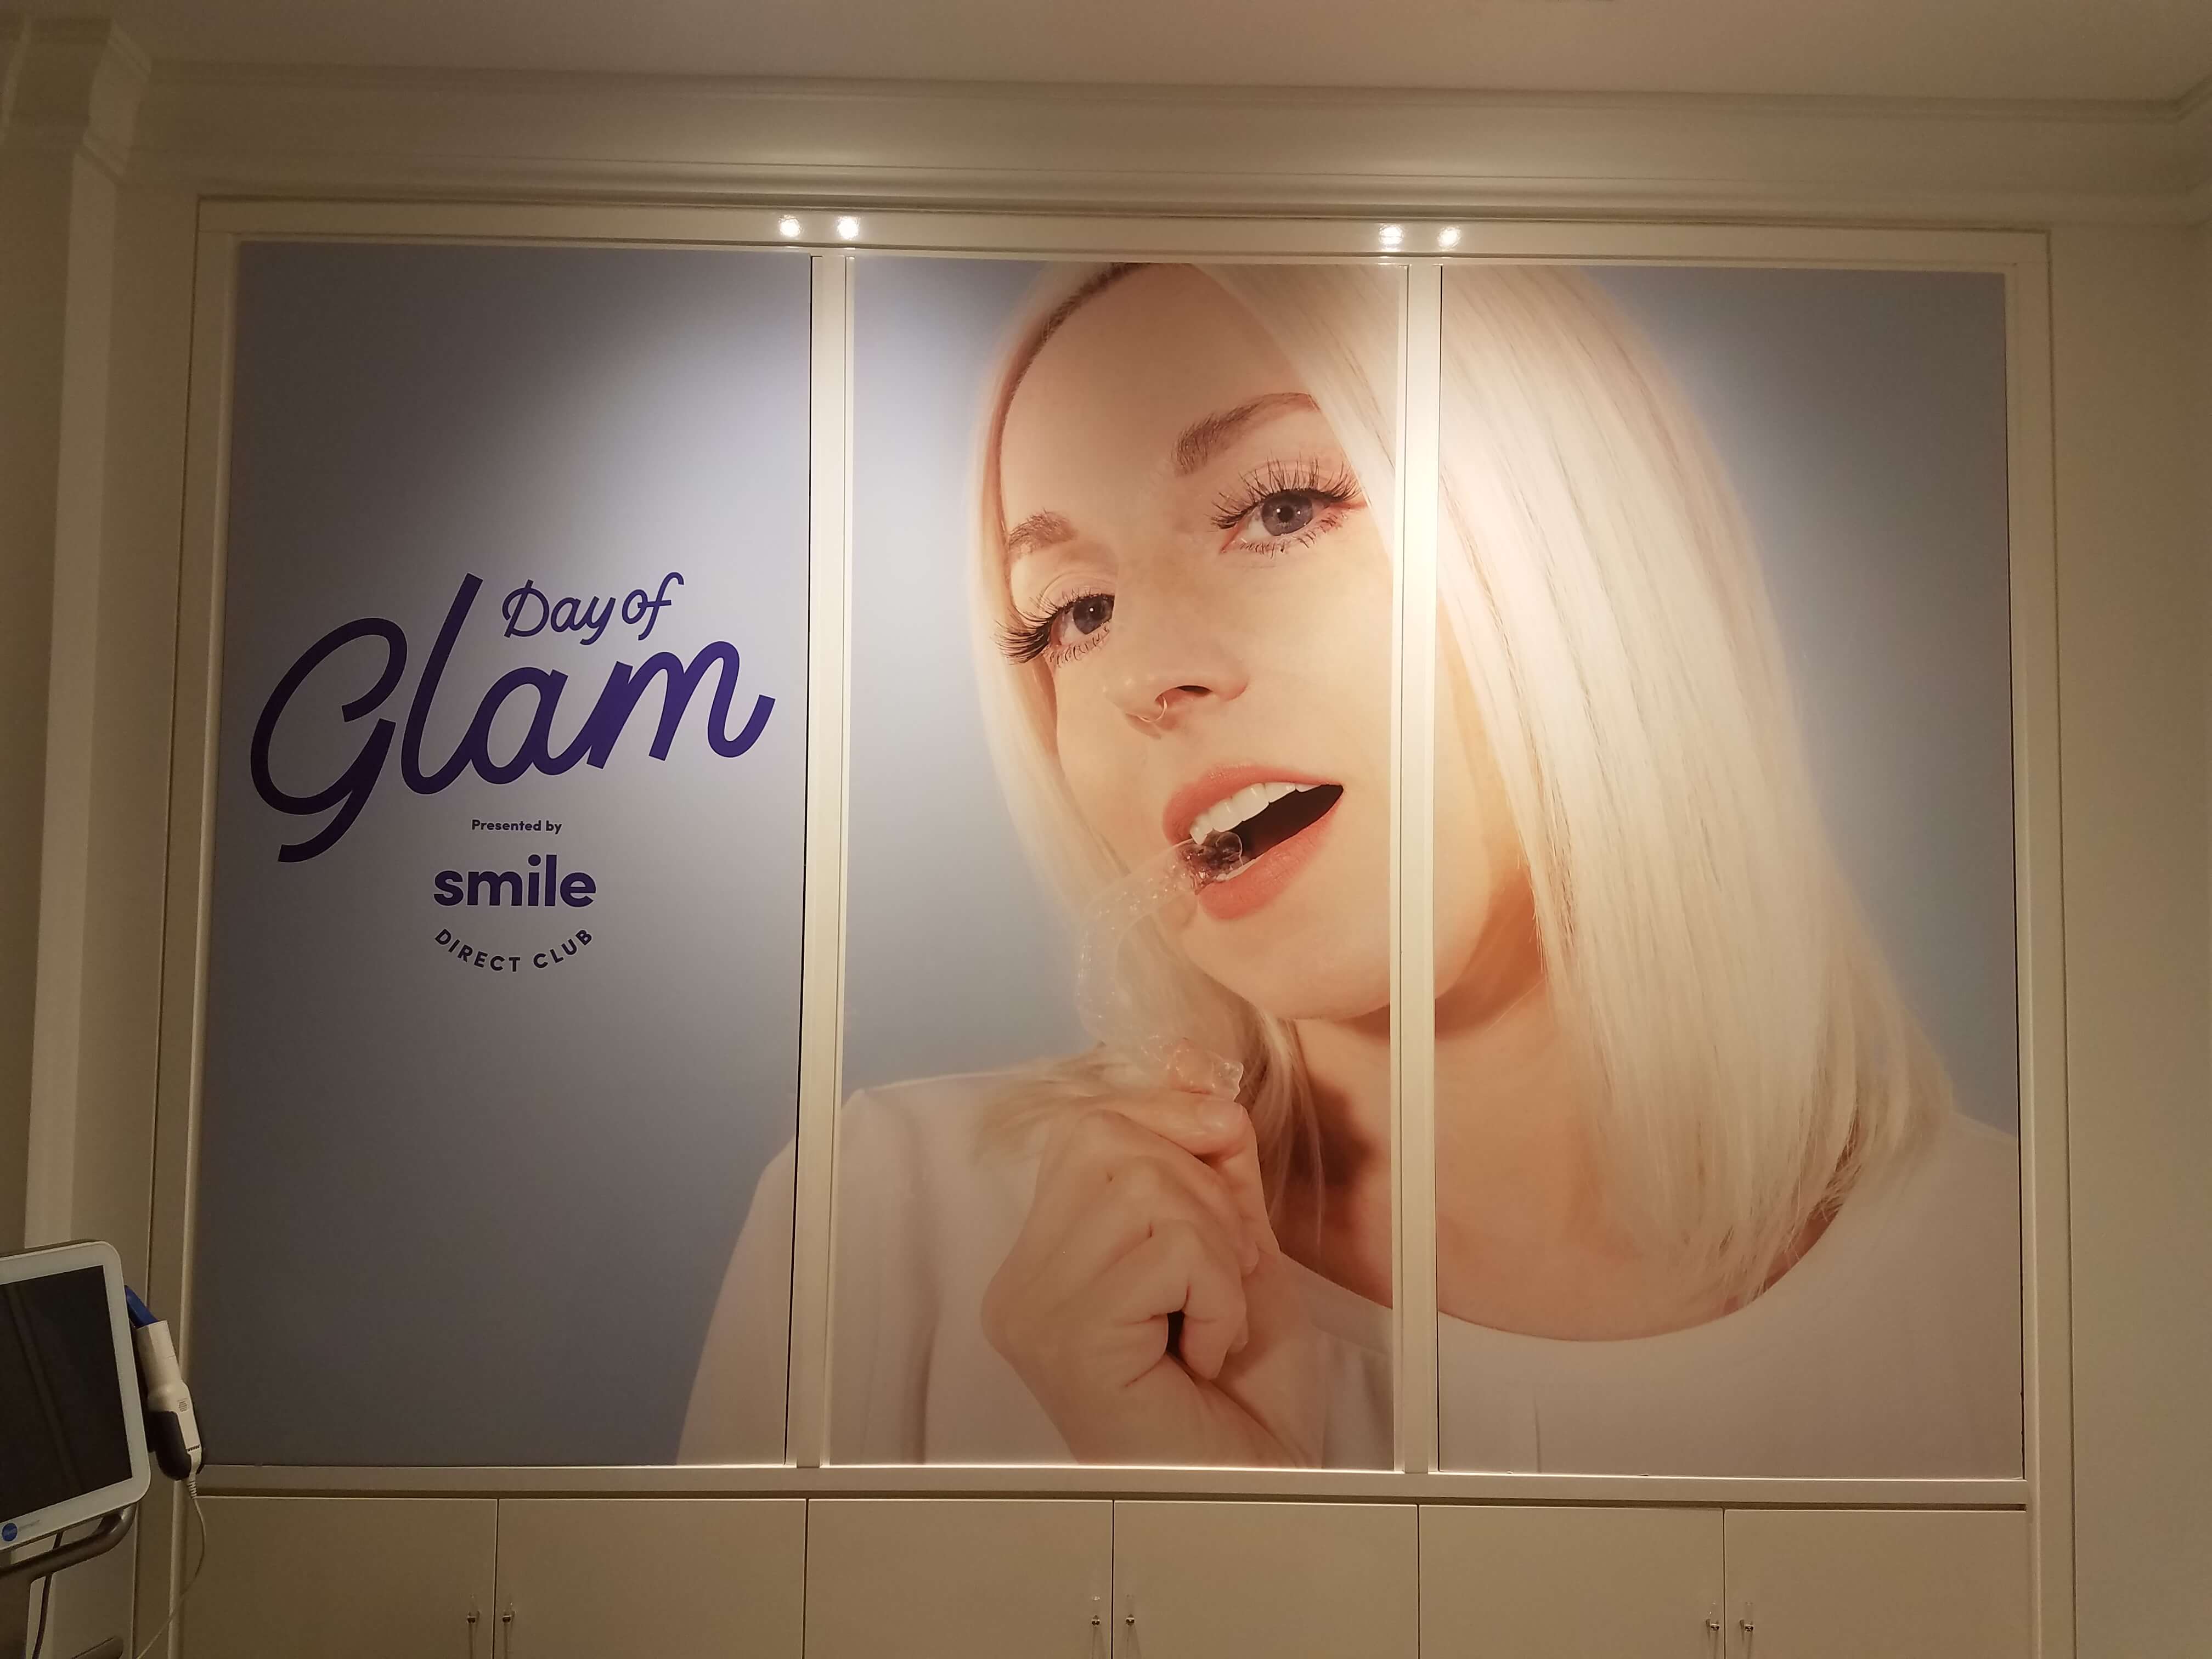 Day of Glam Smile Direct Club Indoor Wall Graphic